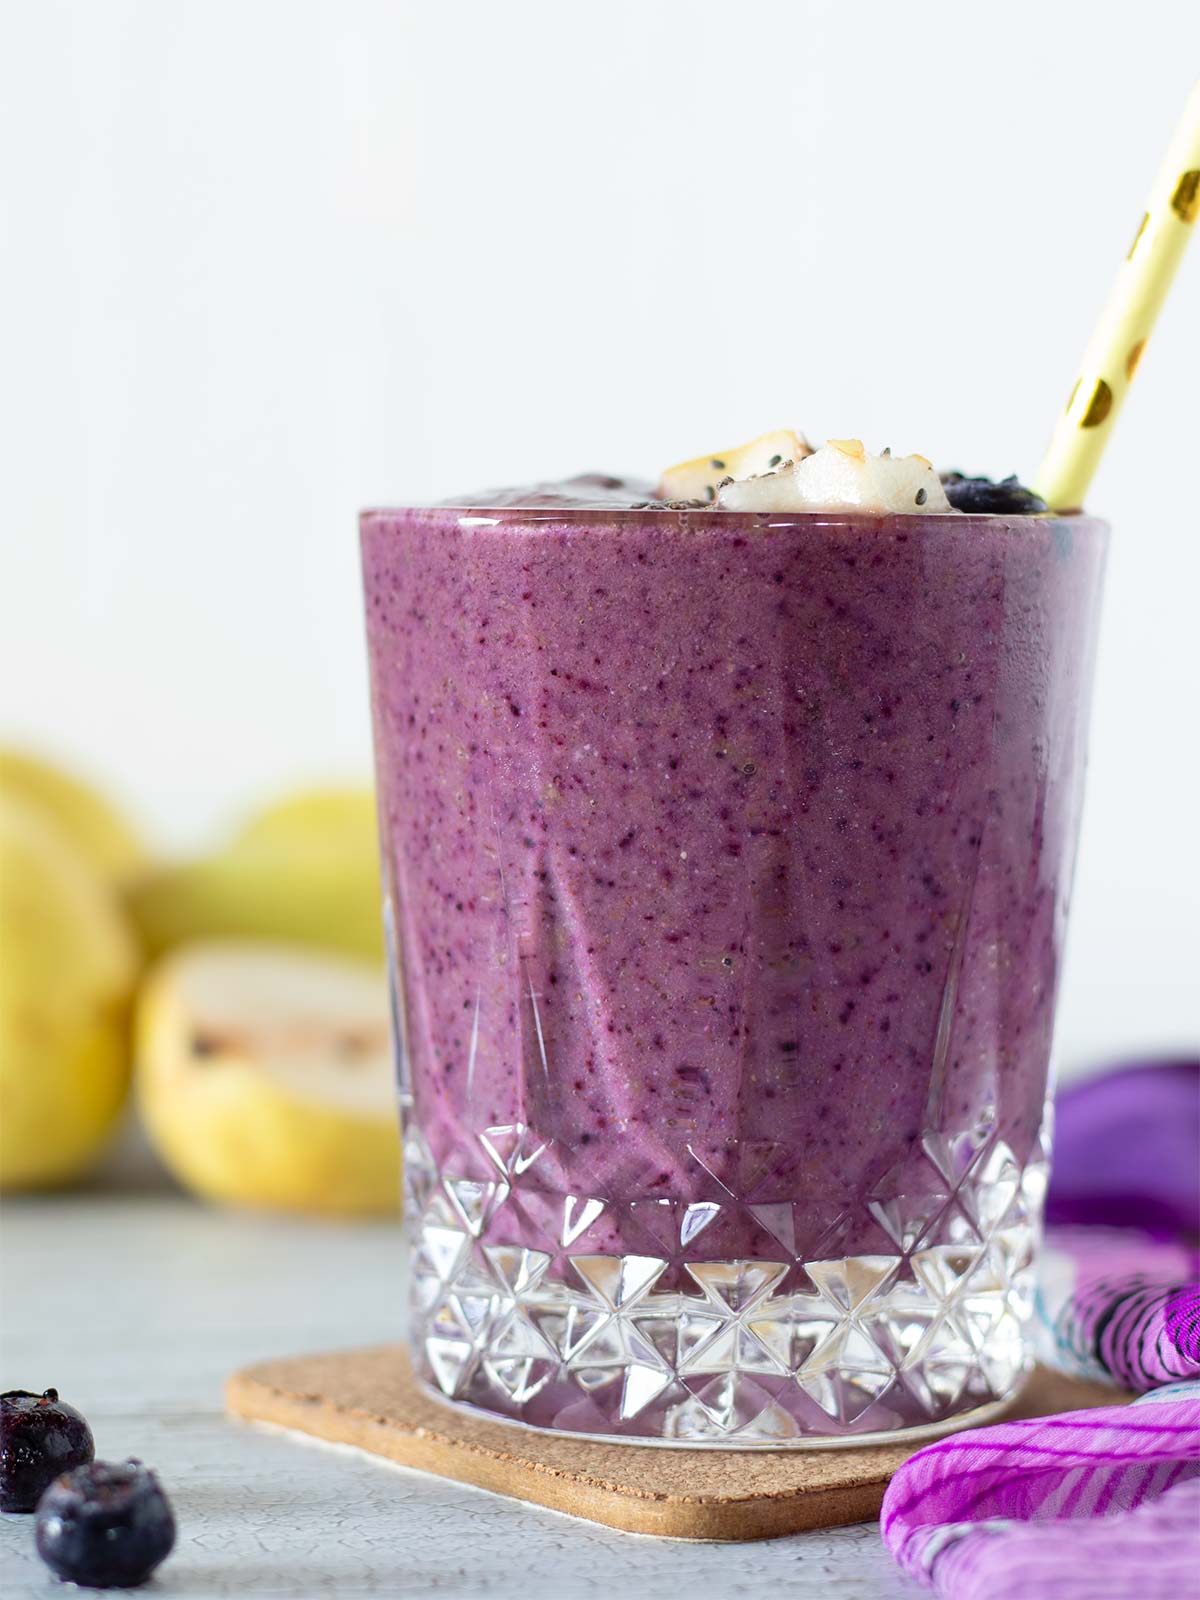 Pear blueberry smoothie without banana for weight loss.